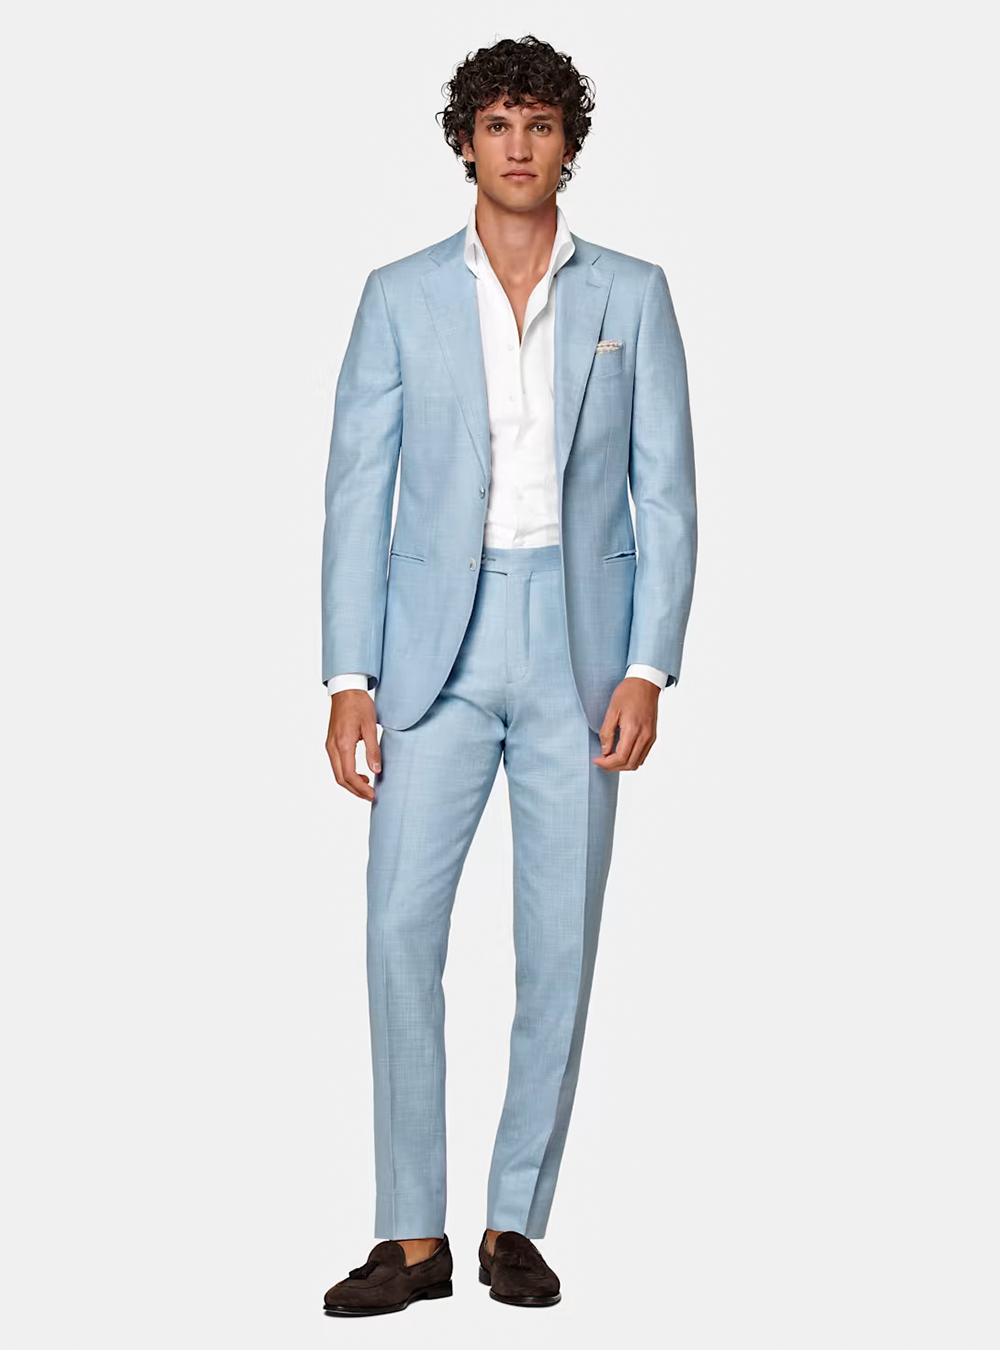 light blue suit, white dress shirt, and brown loafers